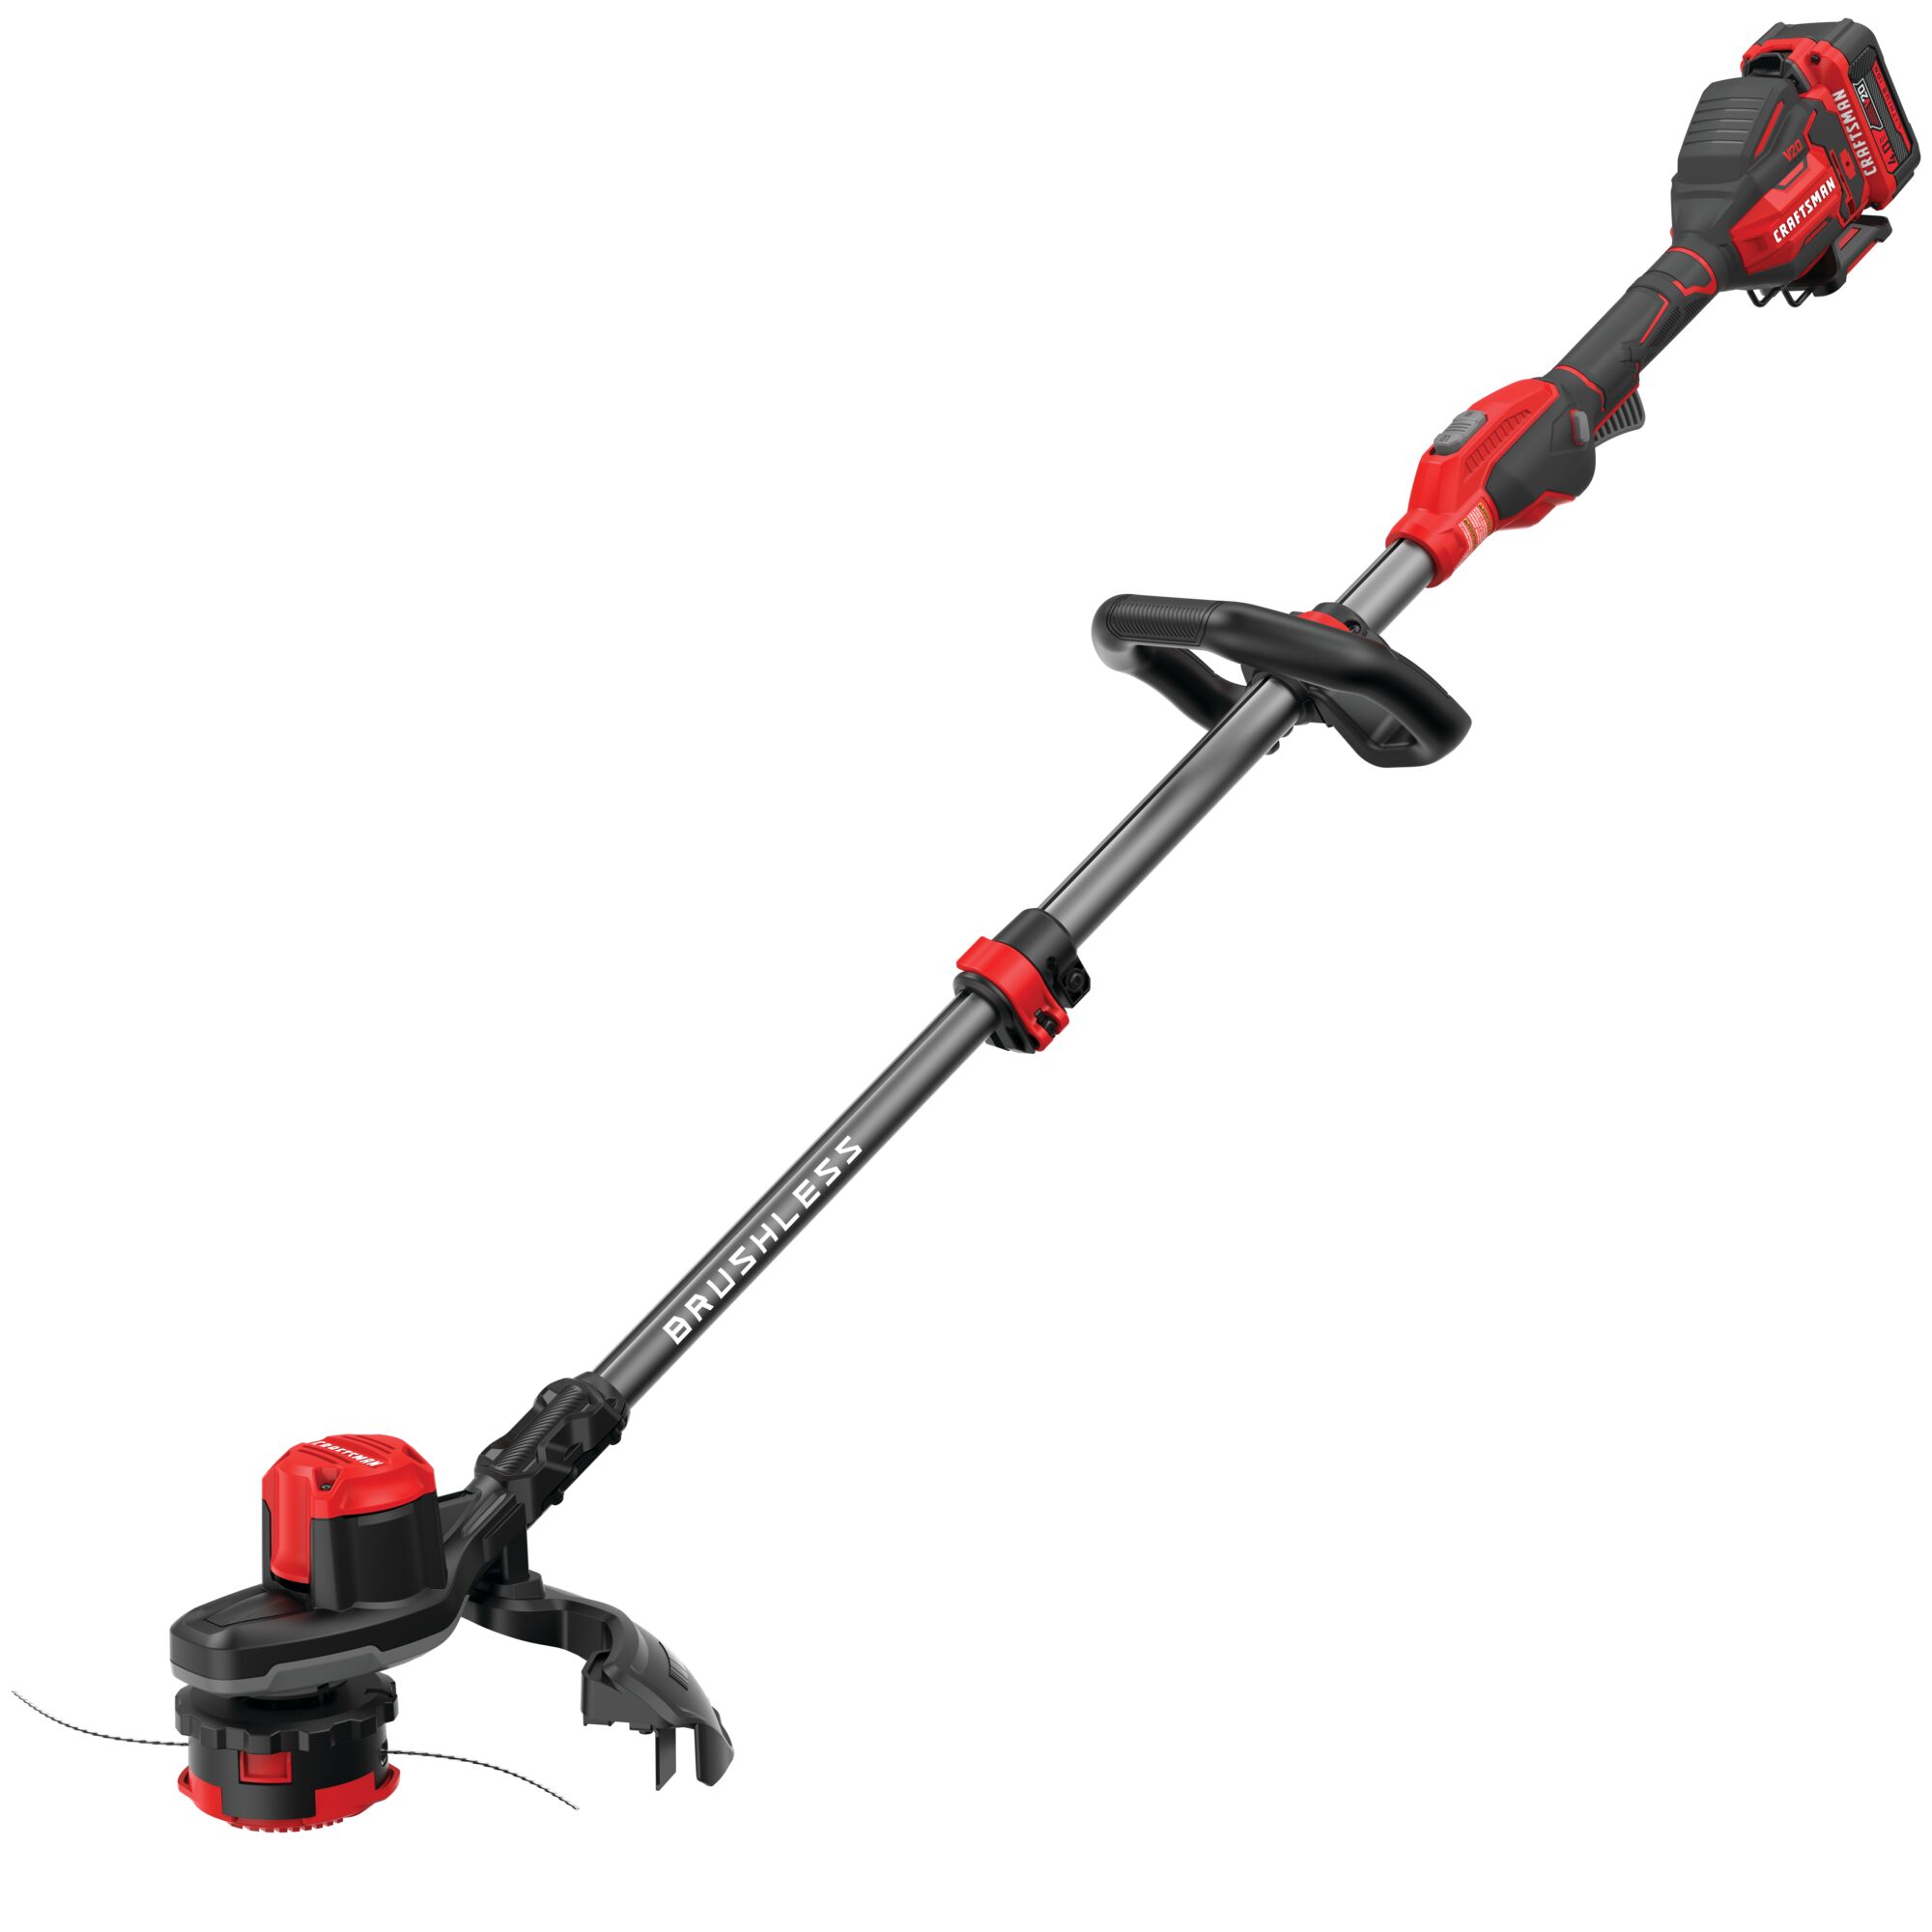 Left profile of 20 volt weedwacker 13 inch brushless cordless string trimmer with quickwind 4.0 ampere per hour.